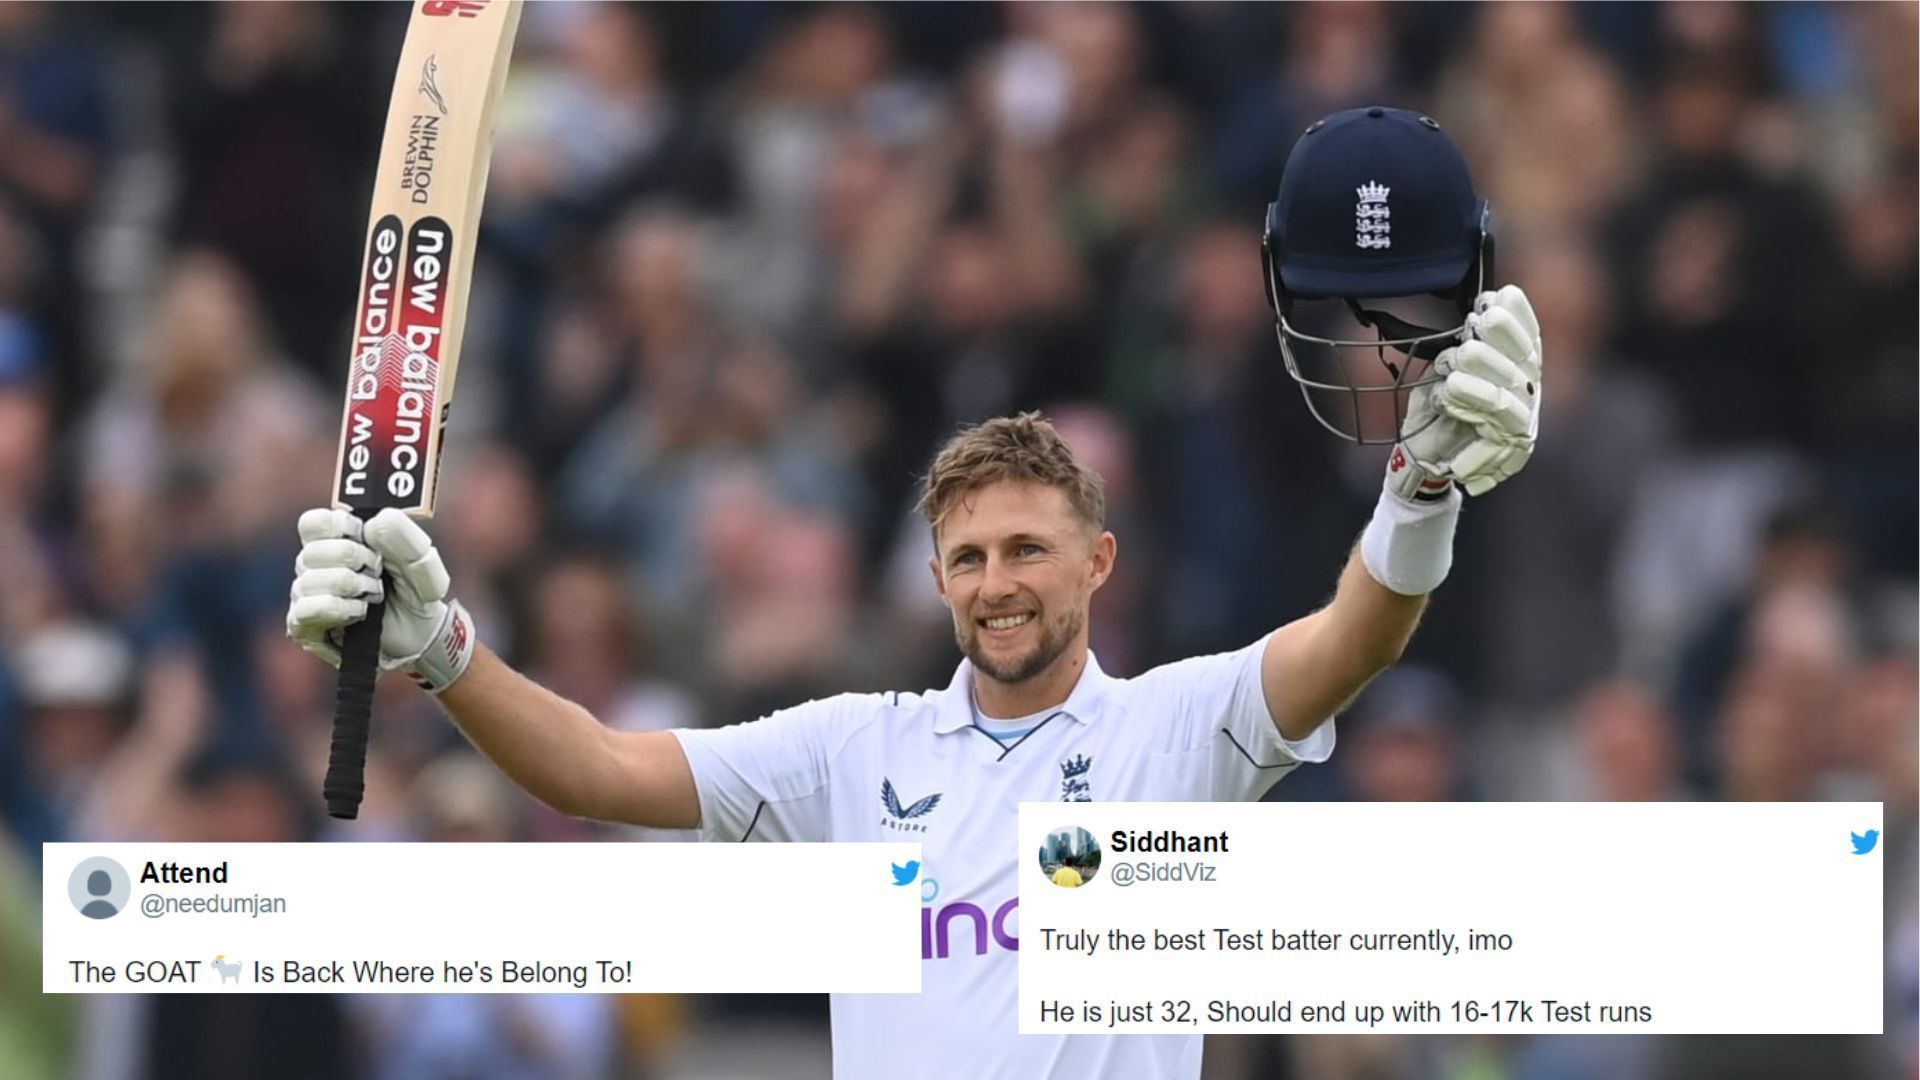 Joe Root replaced Marnus Labuschagne at the top after a fine performance in Edgbaston (P.C.:Twitter)